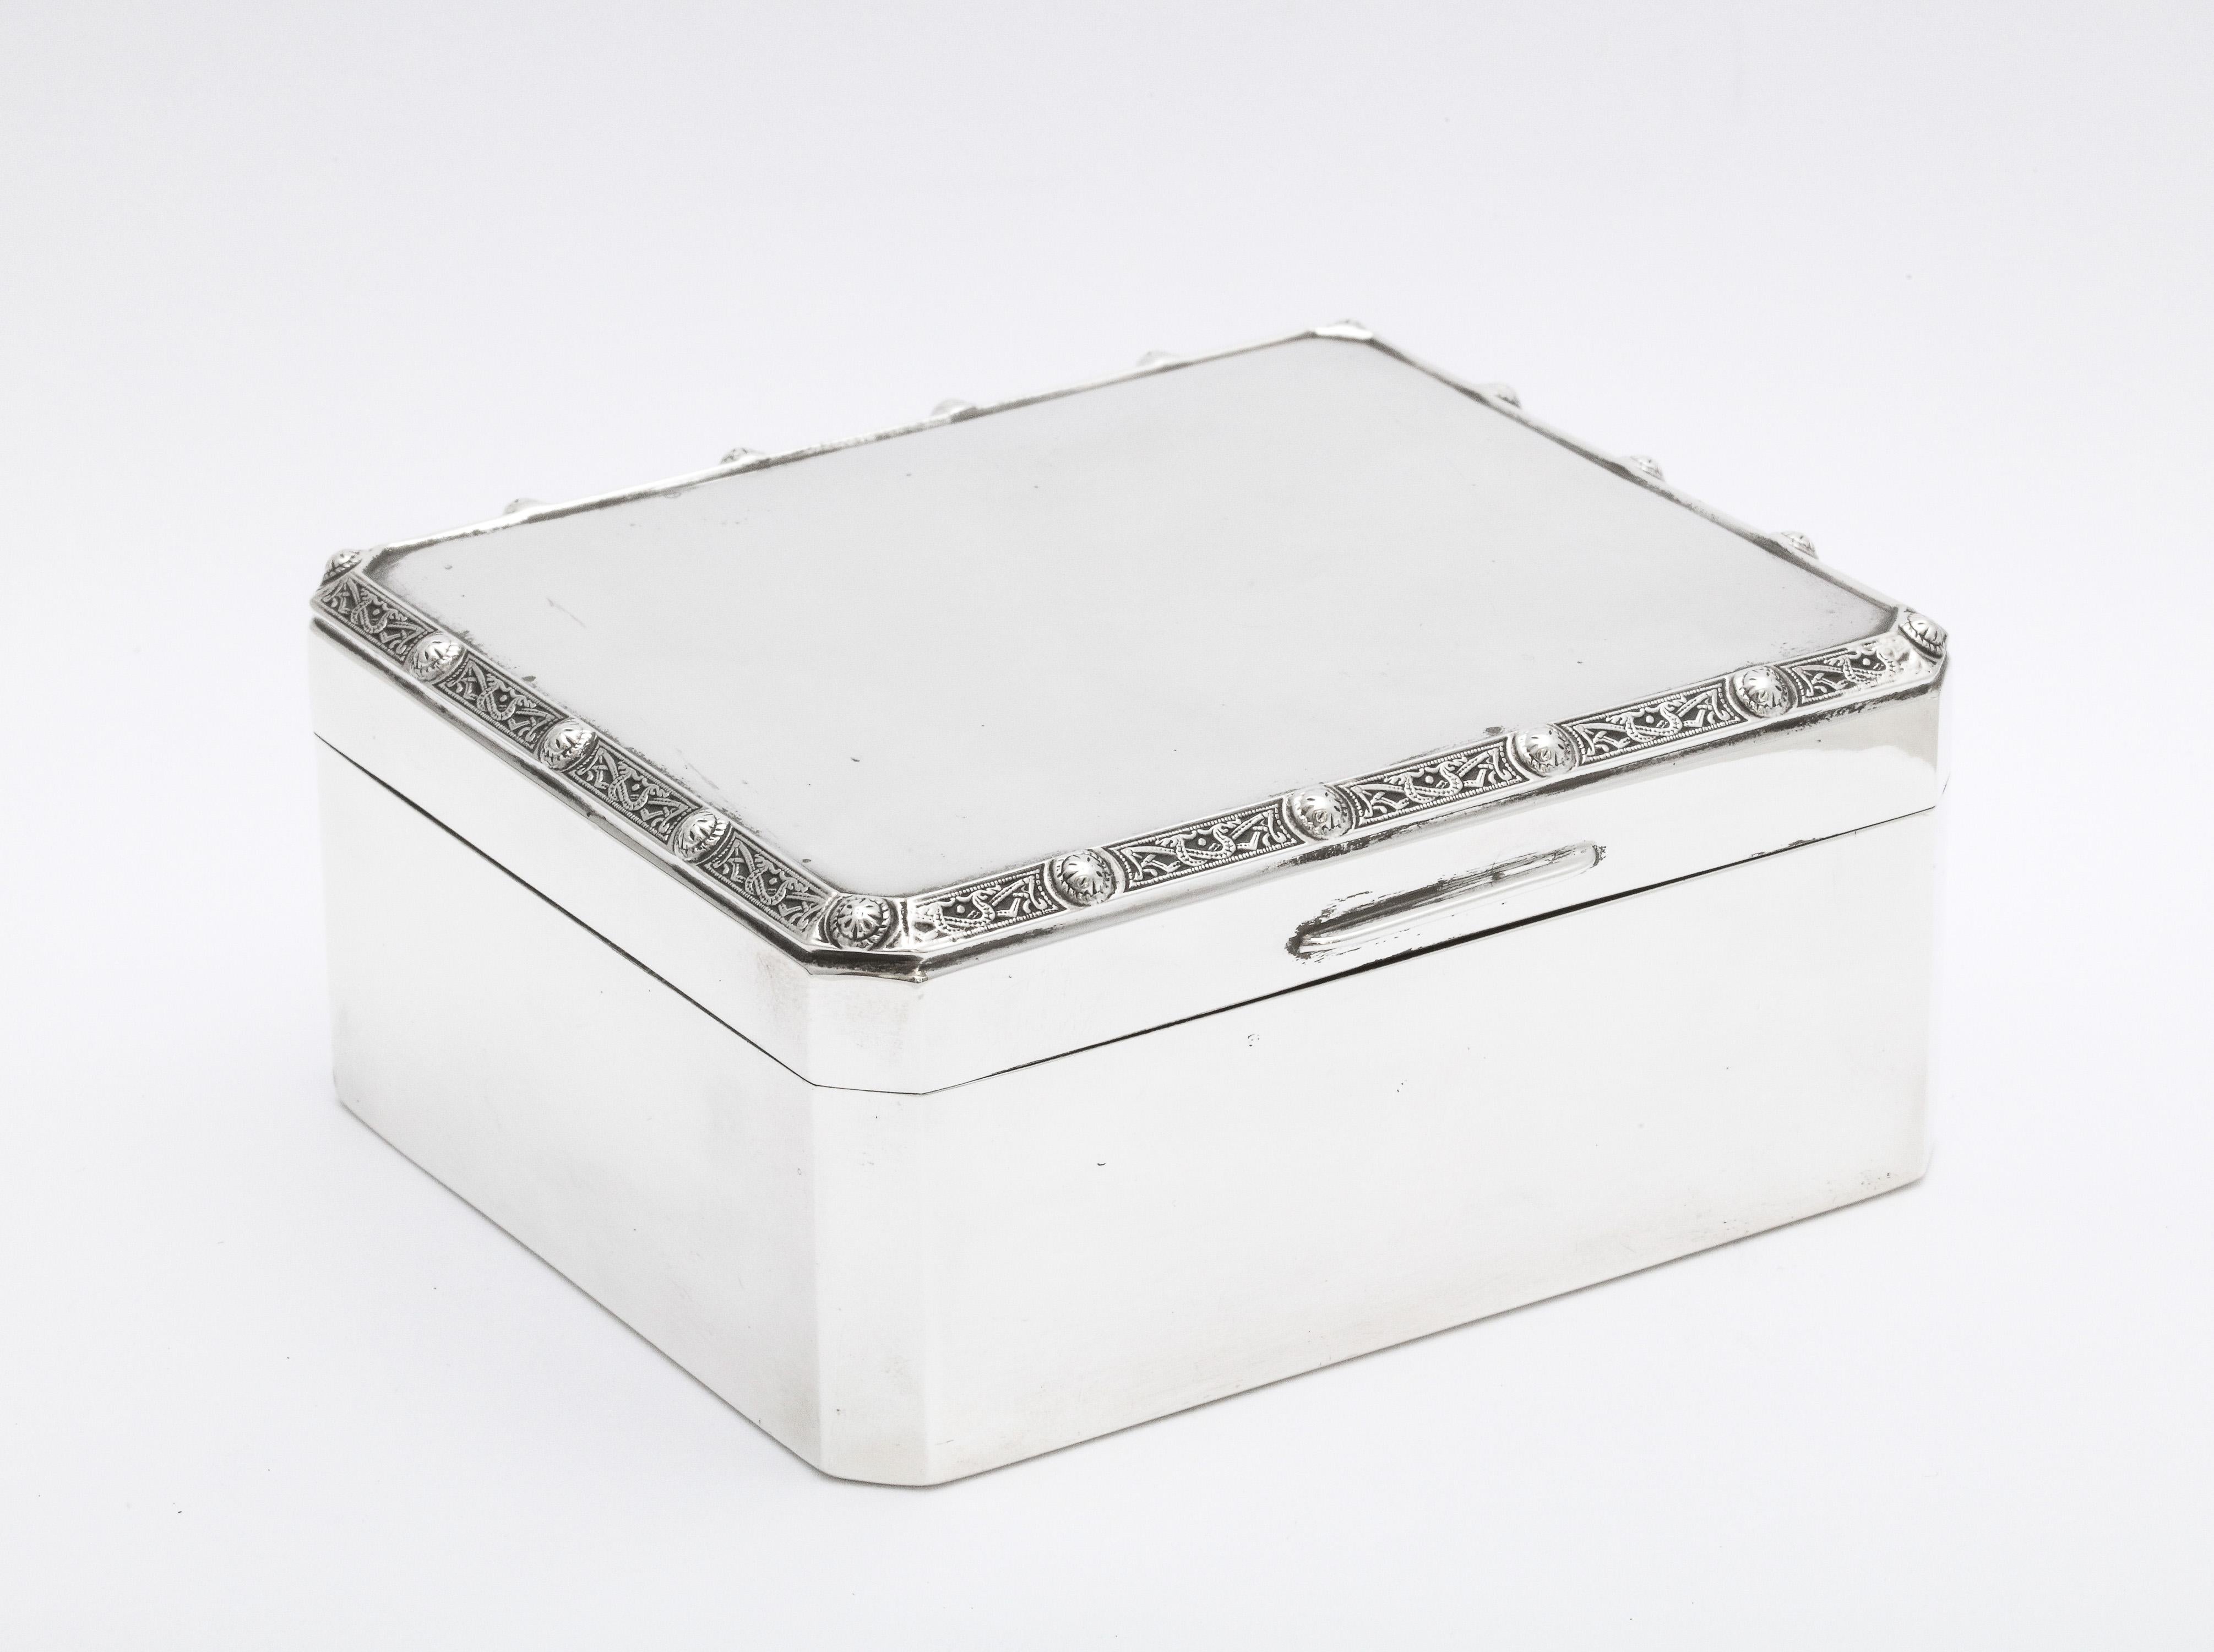 Arts & Crafts-style, George VI period, sterling silver table box with hinged lid, Birmingham, England, year-hallmarked for 1949, Adie Bros. - makers. Lovely Celtic design on border of lid (see photos). Measures 4 1/4 inches wide x 3 1/2 inches deep